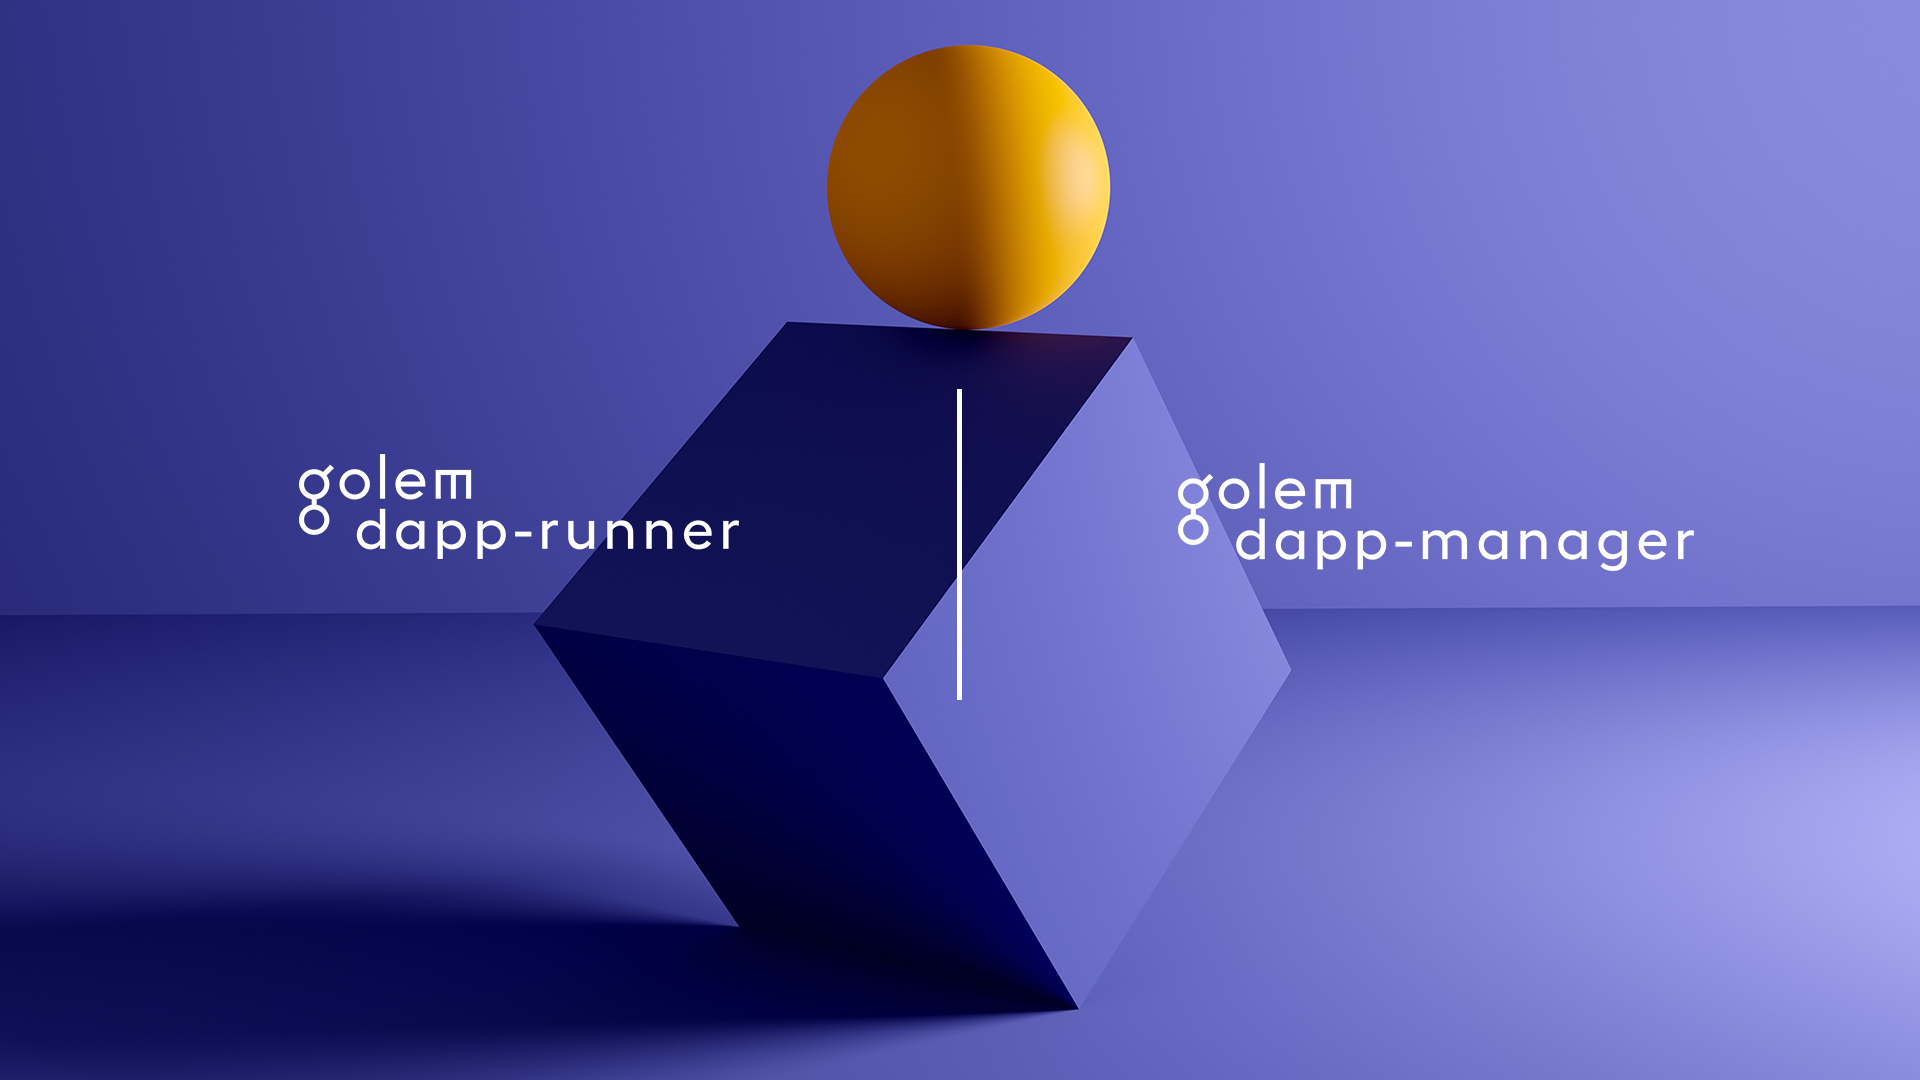 Golem releases new tools to simplify running and managing decentralized applications